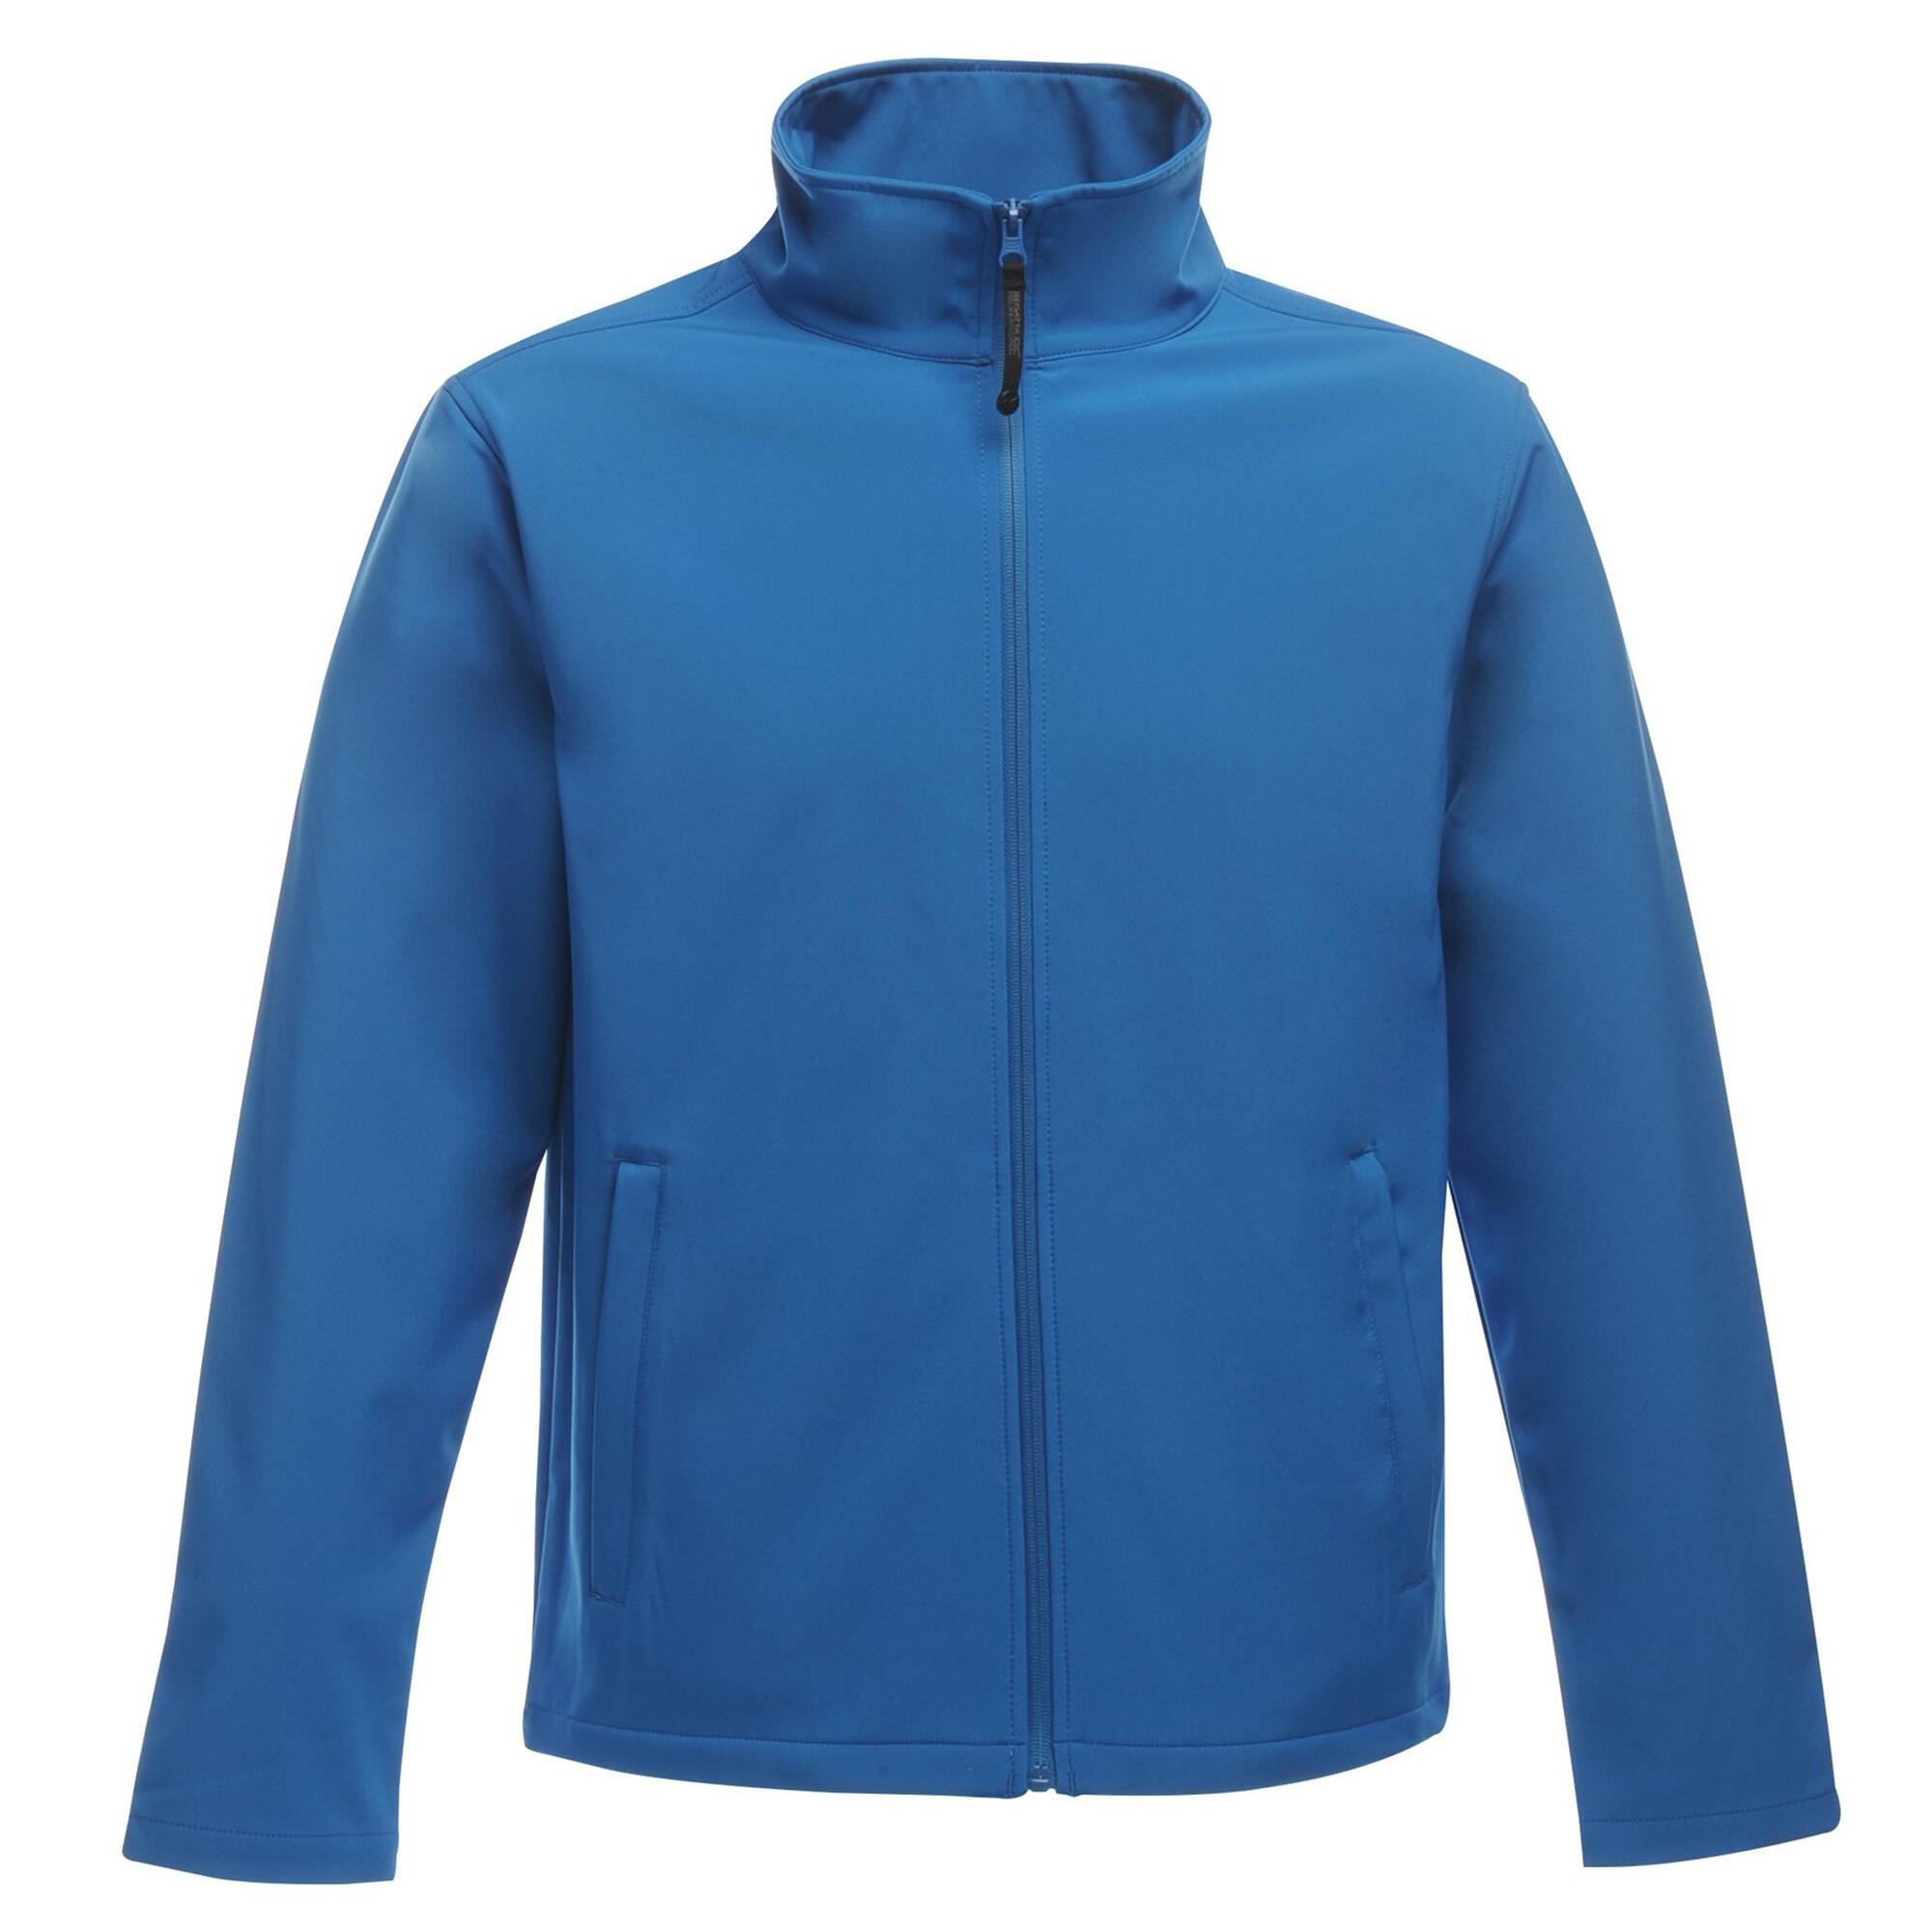 Classic Mens Water Repellent Softshell Jacket (Oxford Blue) 1/4